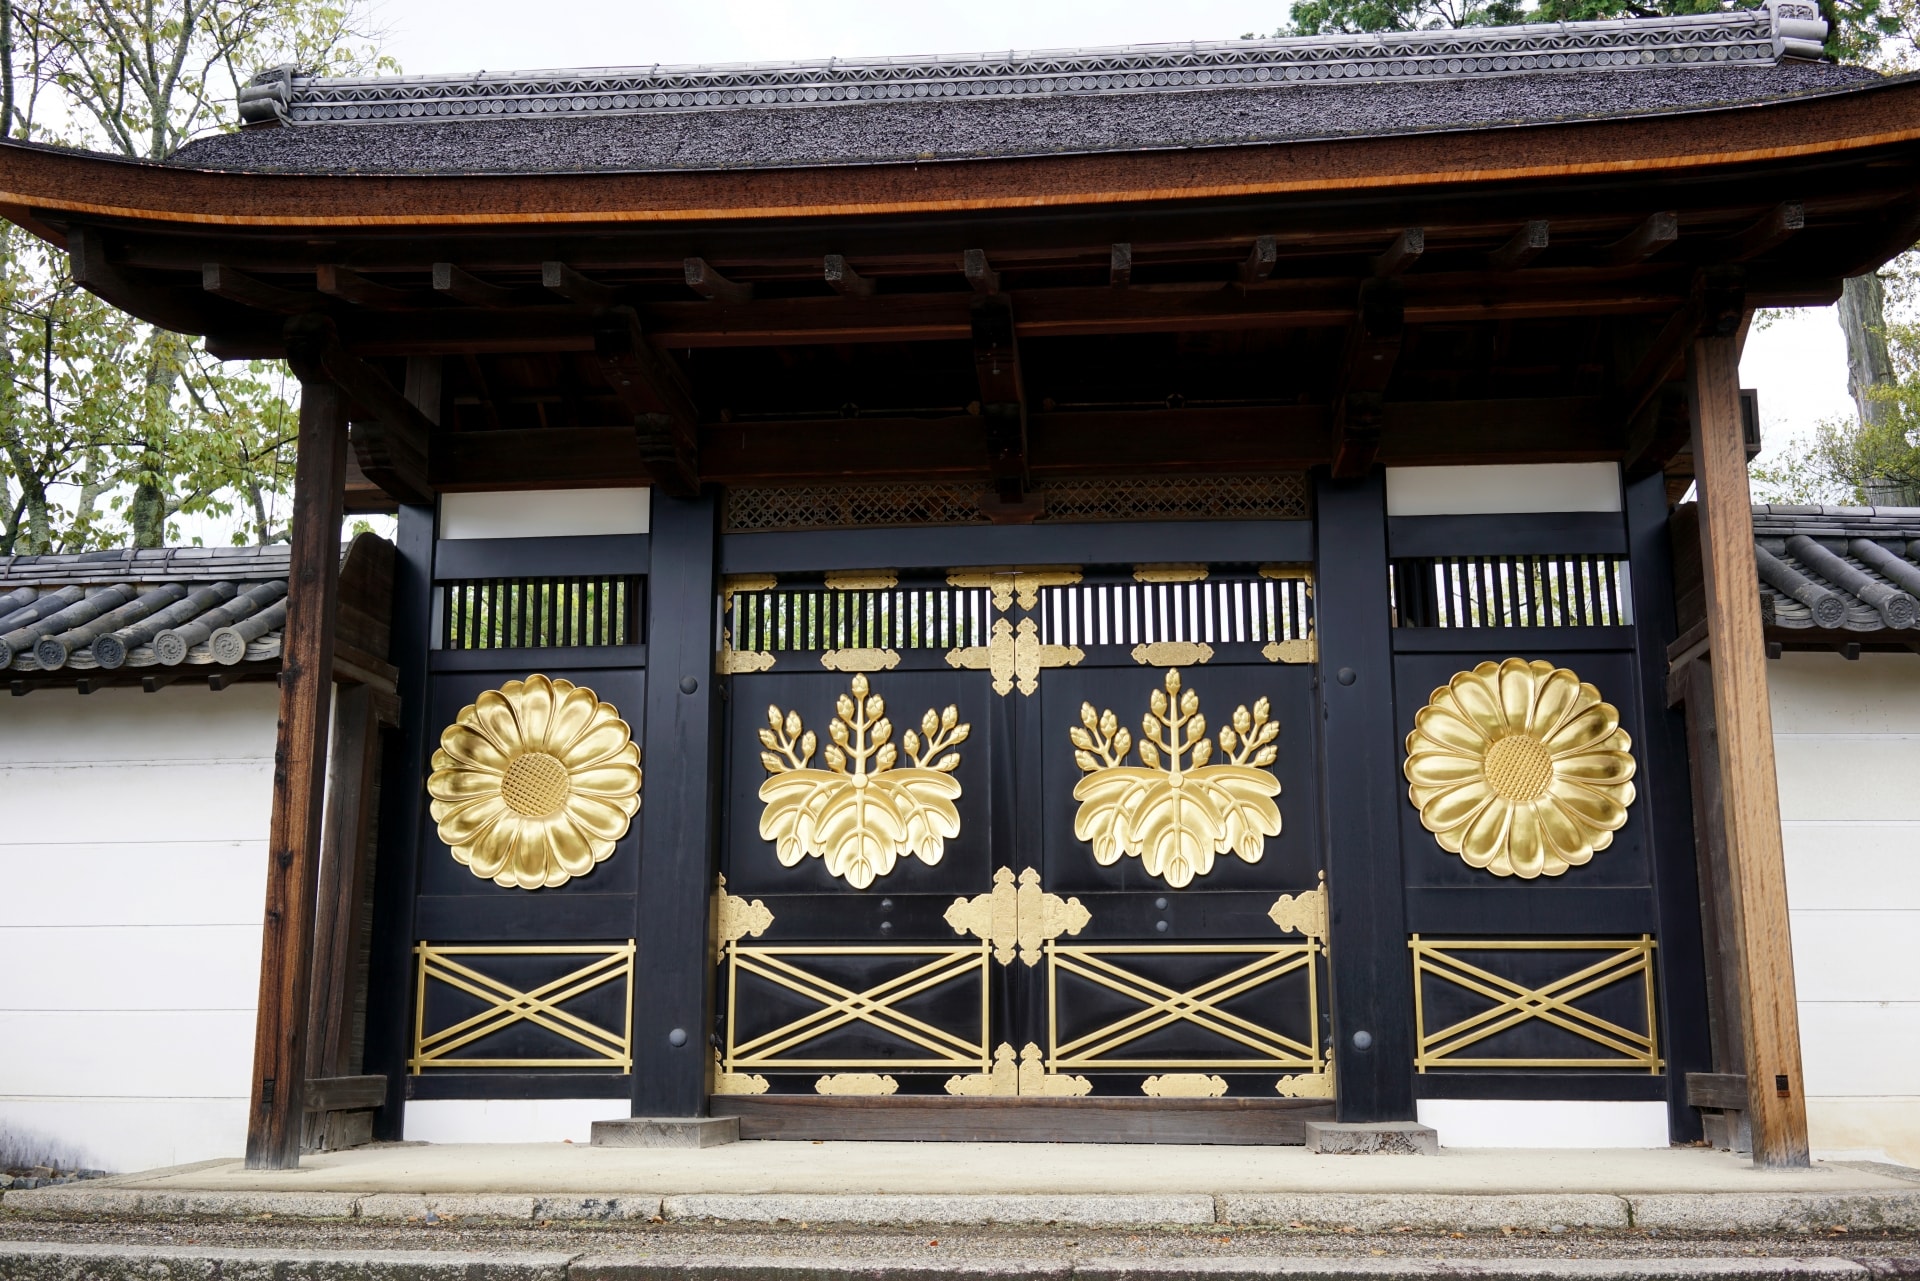 The gate of Daigo-ji Temple in Kyoto covered with urushi lacquer